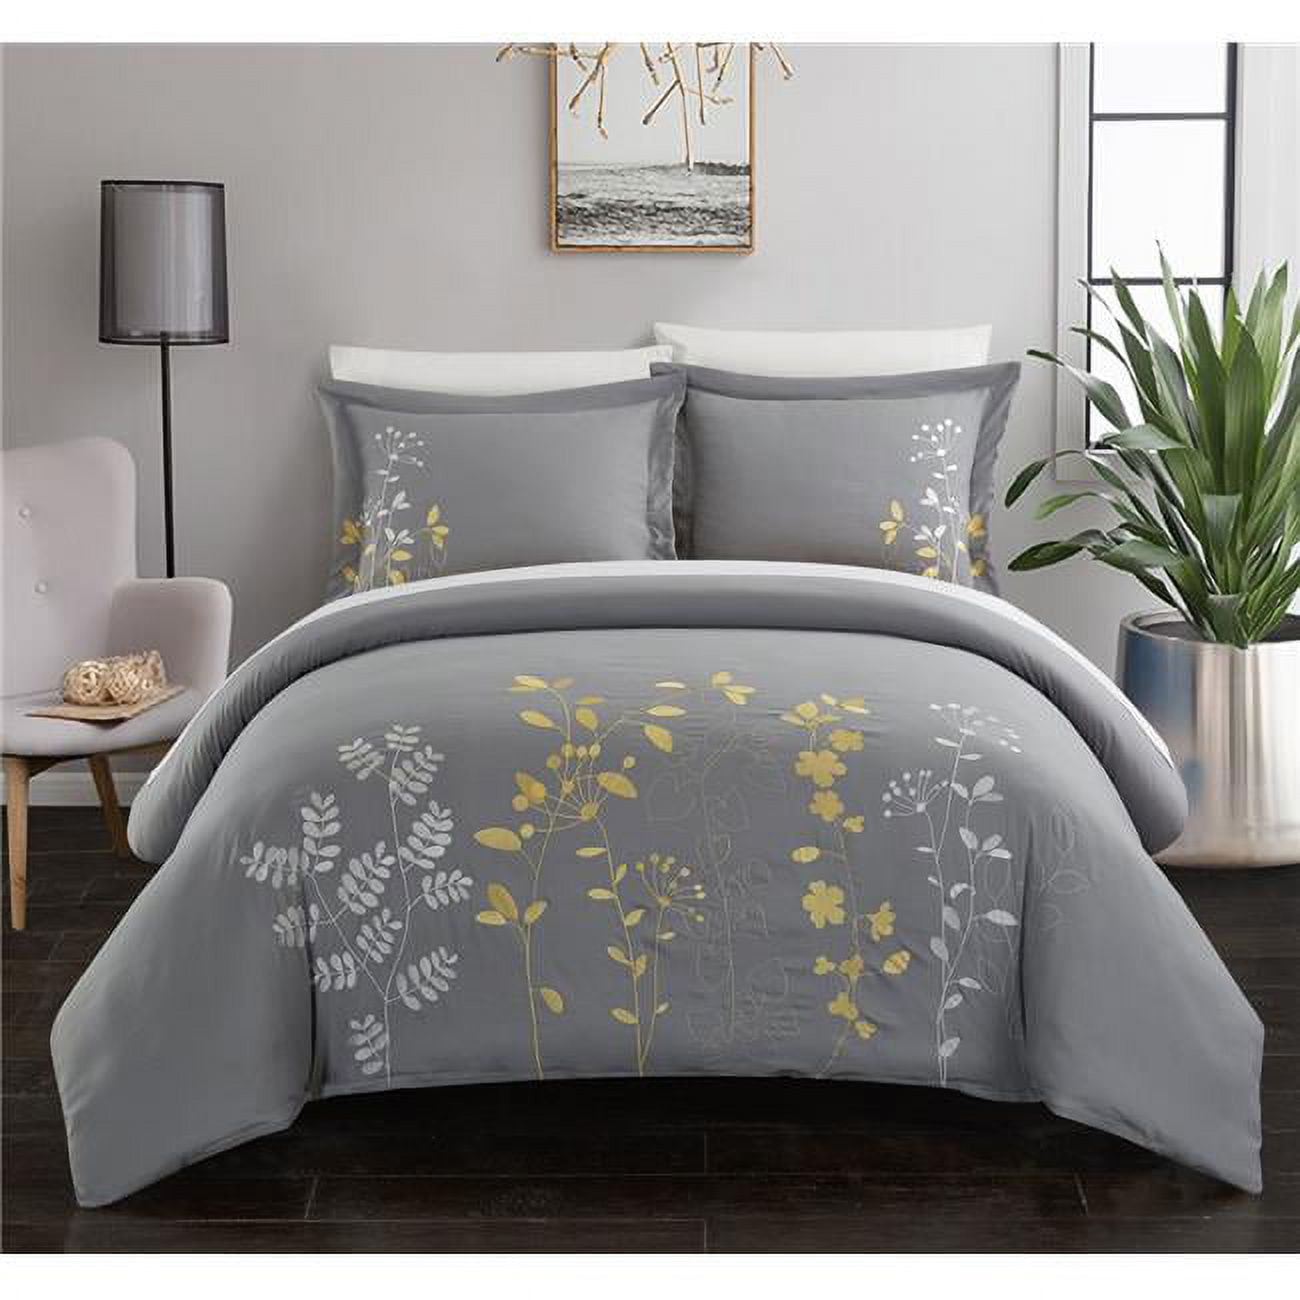 Bds00668-us Queen Size Kylie Duvet Embroidered Floral Design Backing Zipper Closure Bedding - Decorative Pillow Shams Included, Yellow - 3 Piece